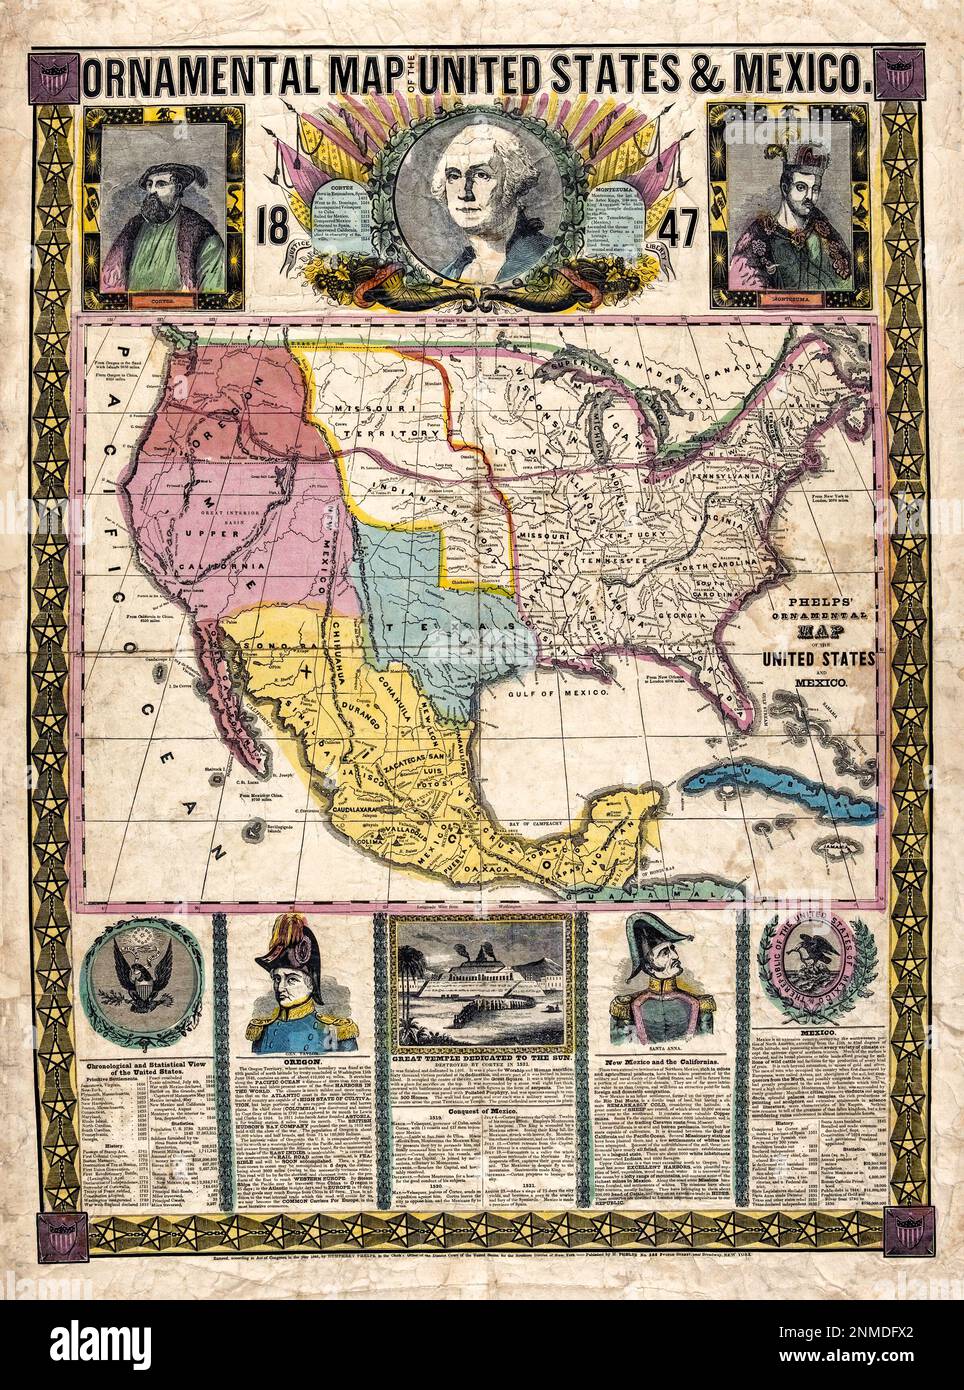 Enhanced, restored, reproduction of an antique map showing the United States and Mexico mid 19th century. Original title: 'Ornamental map of the United States & Mexico.' Published 1847. Gives historical data, thumbnail biographies, and statistical data within information boxes. Includes portraits of Cortez, Montezuma, Washington, Gen. Santa Anna, Gen. Taylor. Shows route of certain railroads. This antique map was intended for decorative purposes but is full of historical information. Although edited and brightened, this reproduction retains imperfections characteristic of an antique wall map. Stock Photo